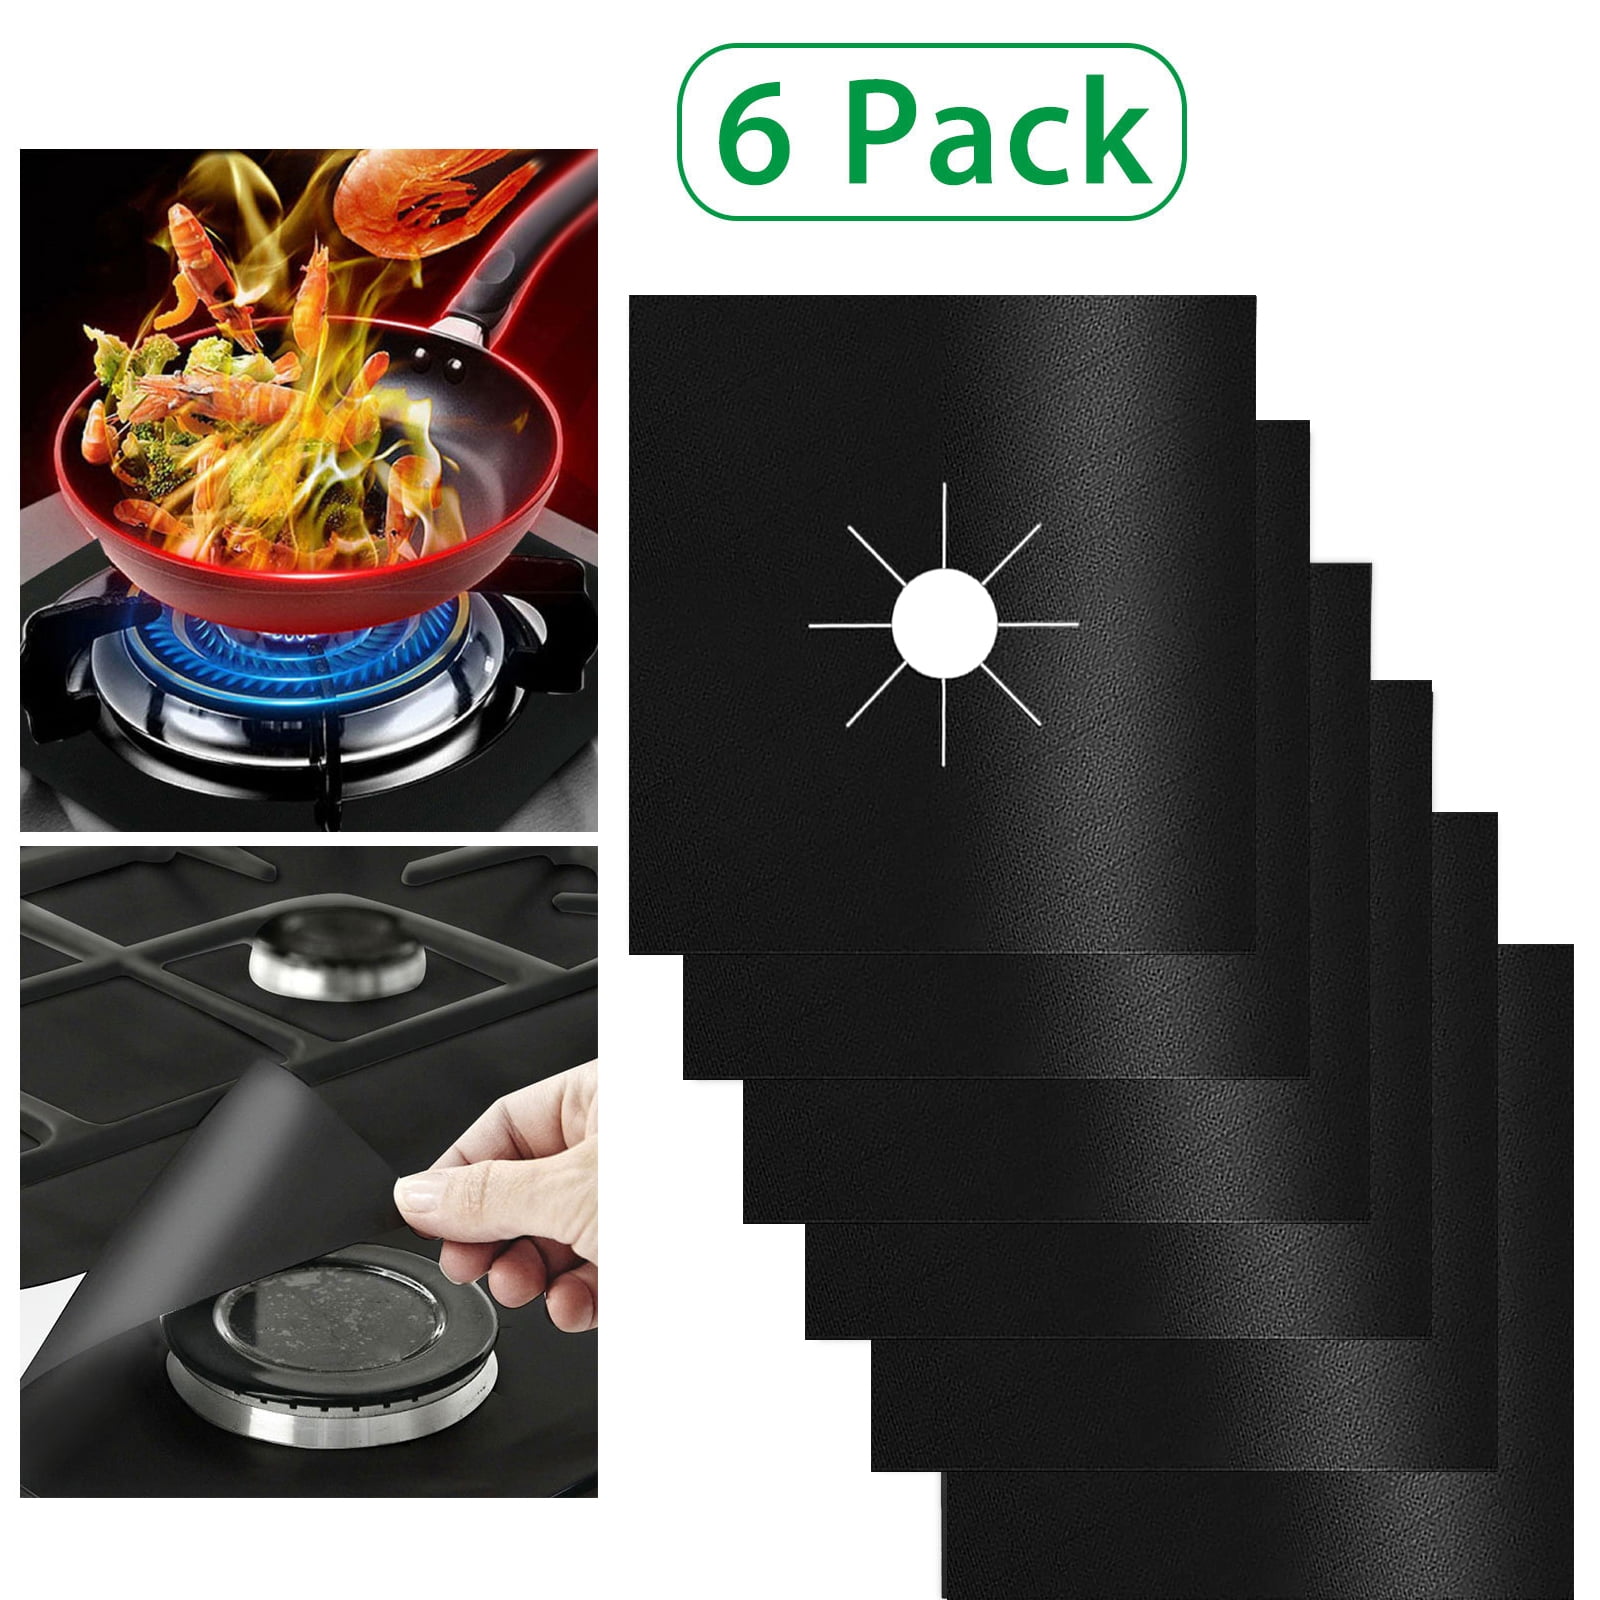 10 Pack Stove Burner Covers Double Thickness 0.3mm Reusable Non-Stick Gas Range 